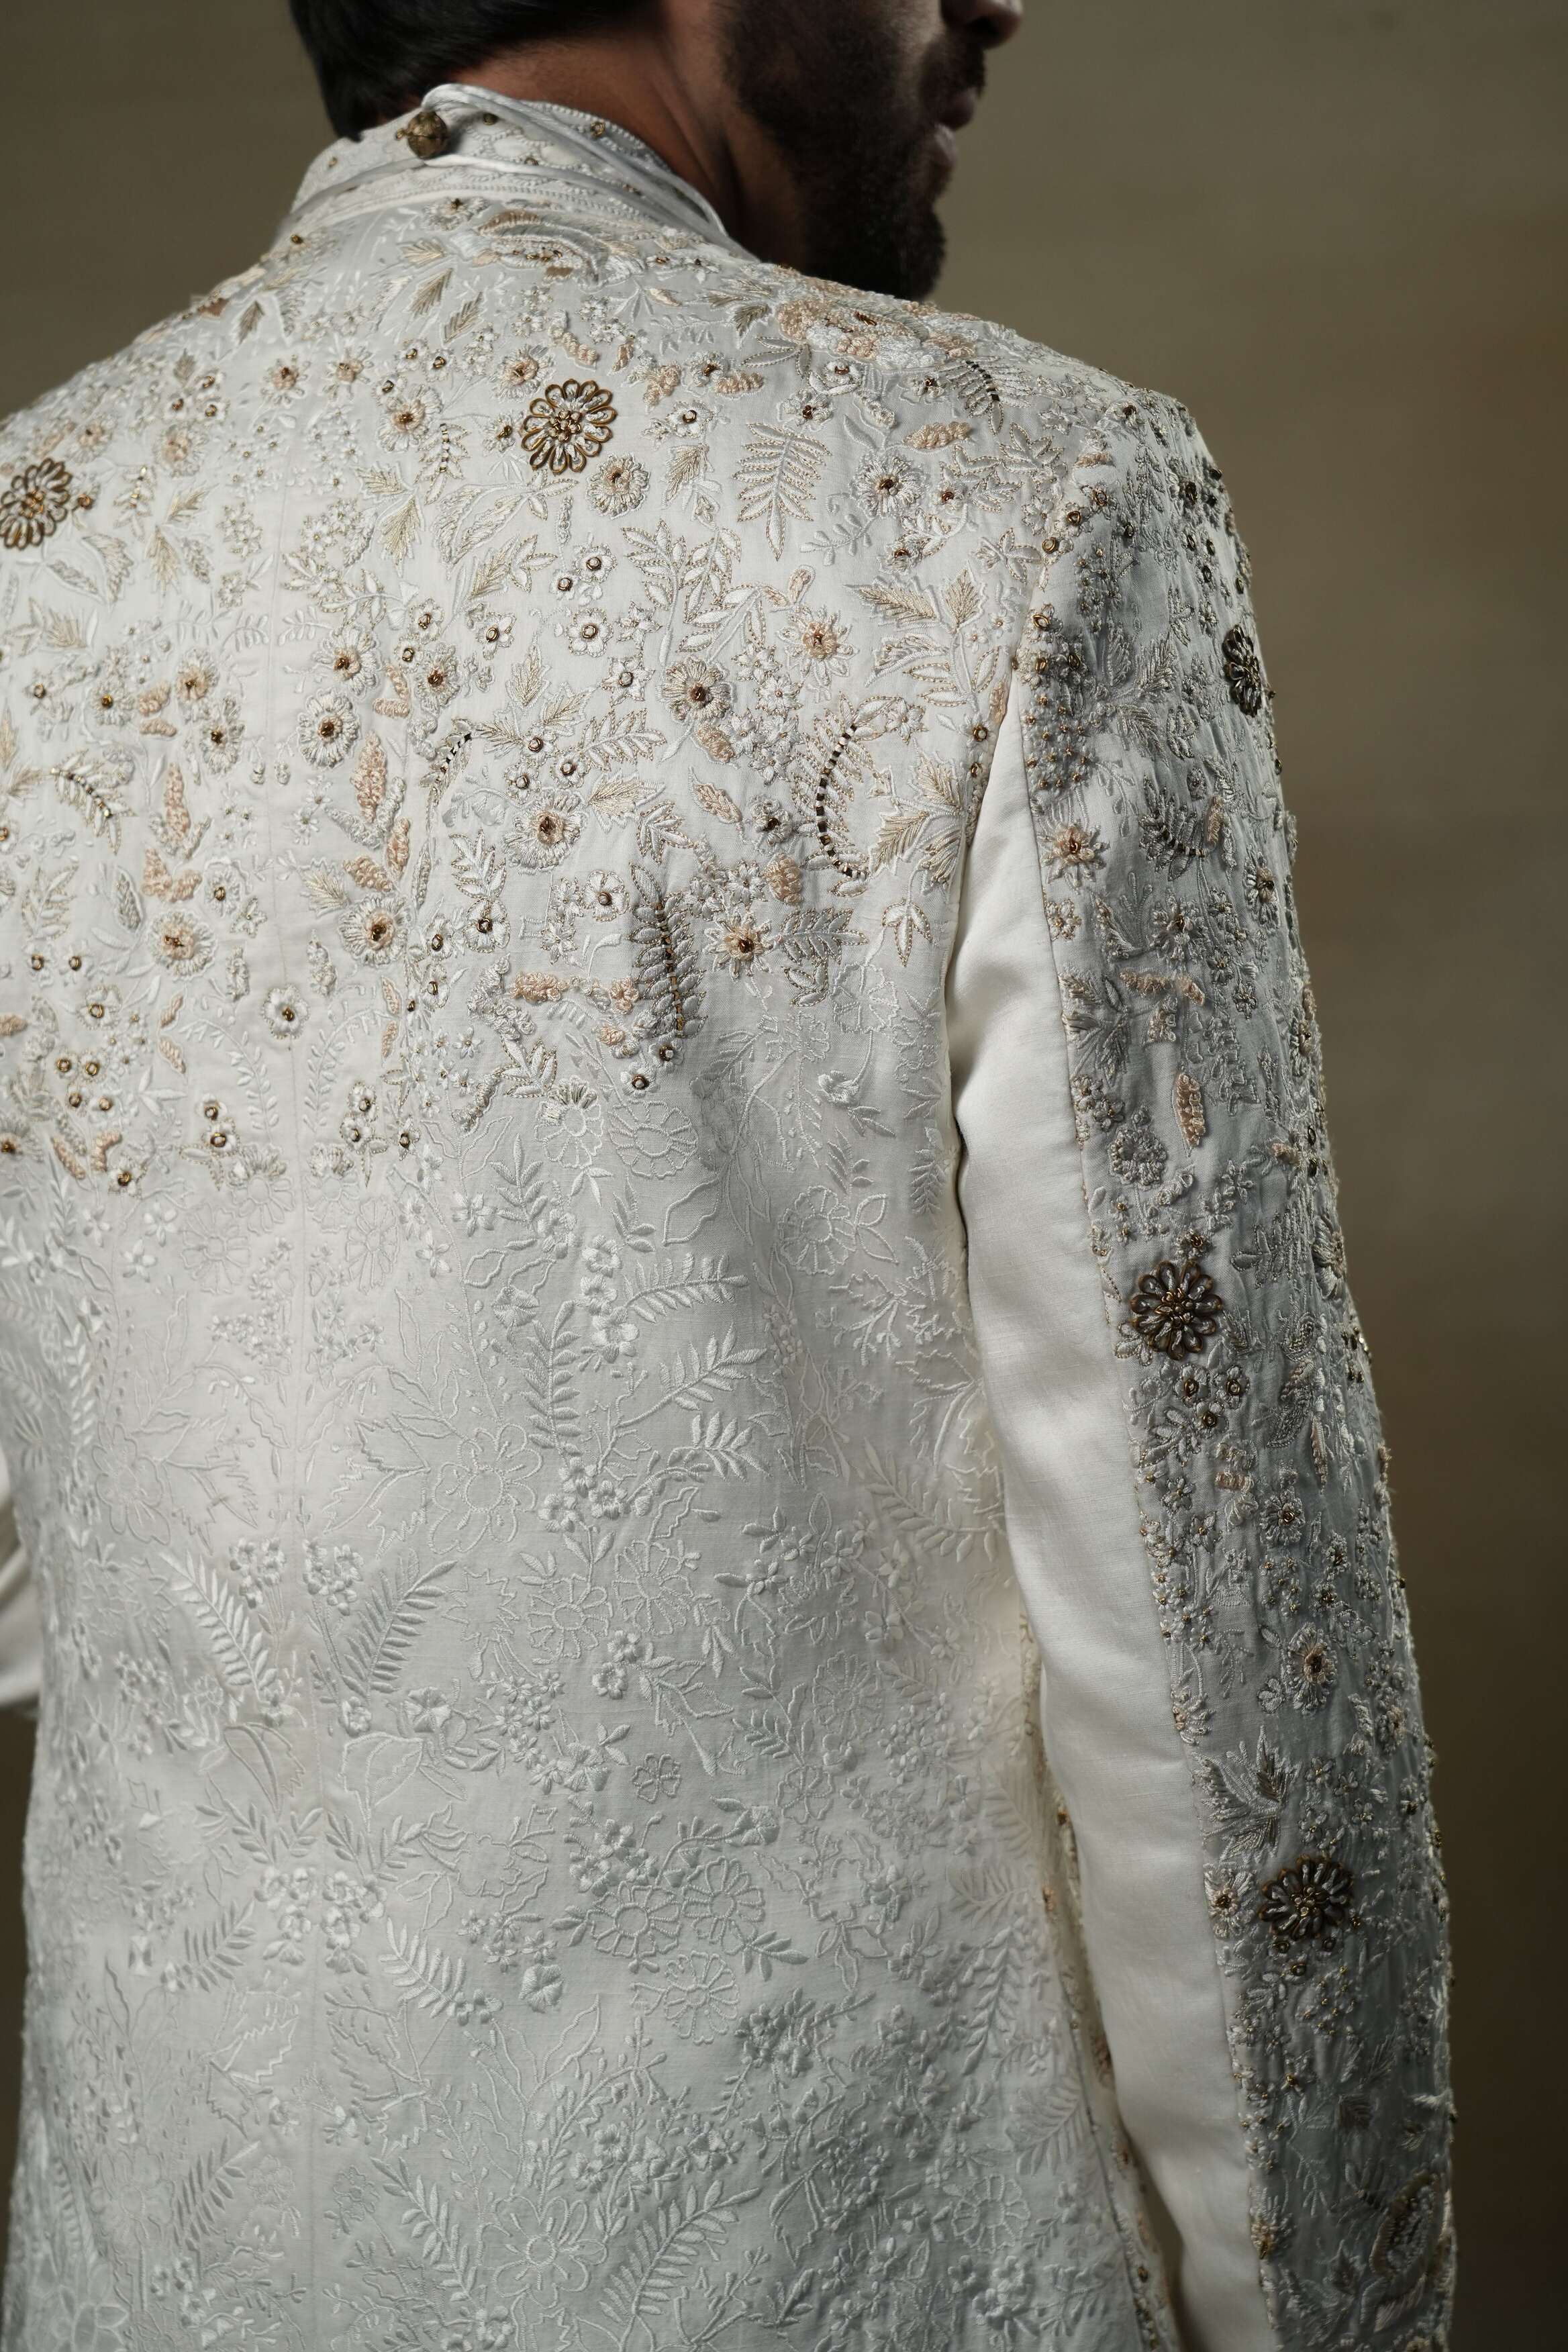 Back view of the Ivory & Gold Sherwani, featuring ornate gold embellishments and a tailored fit.